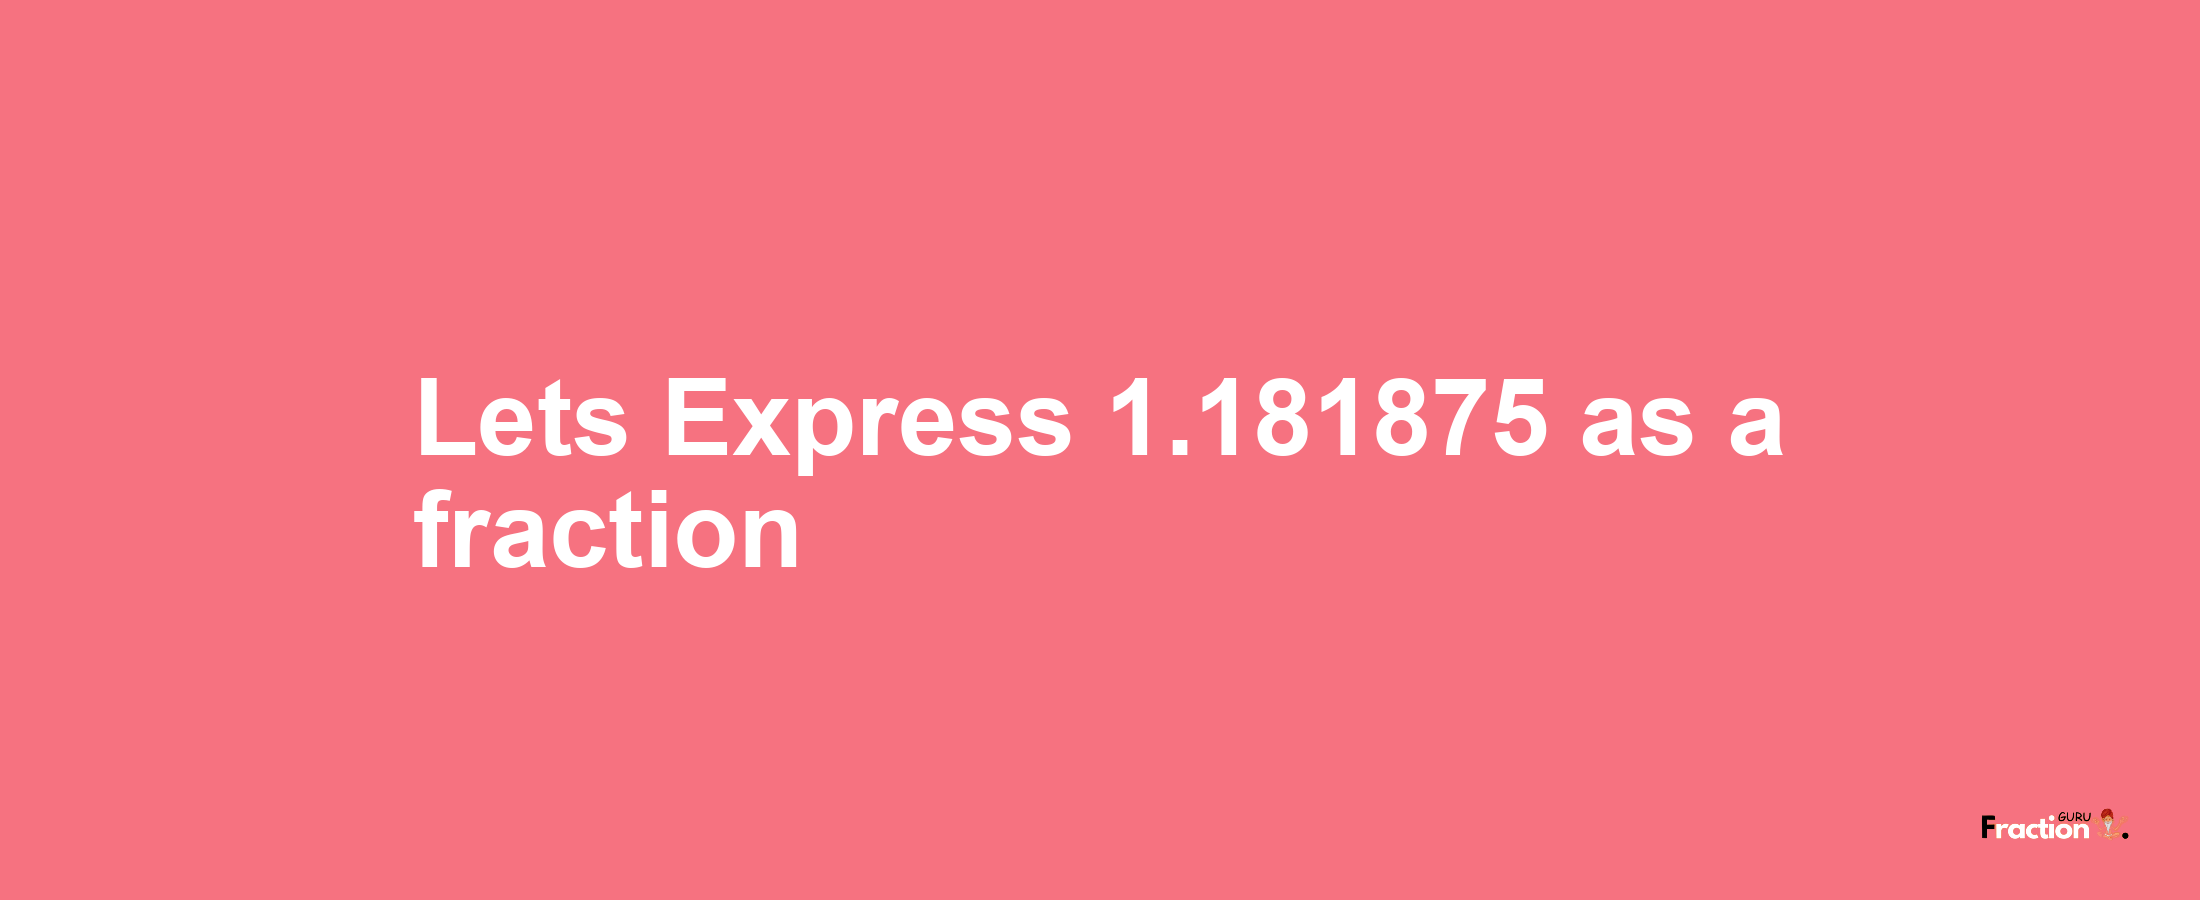 Lets Express 1.181875 as afraction